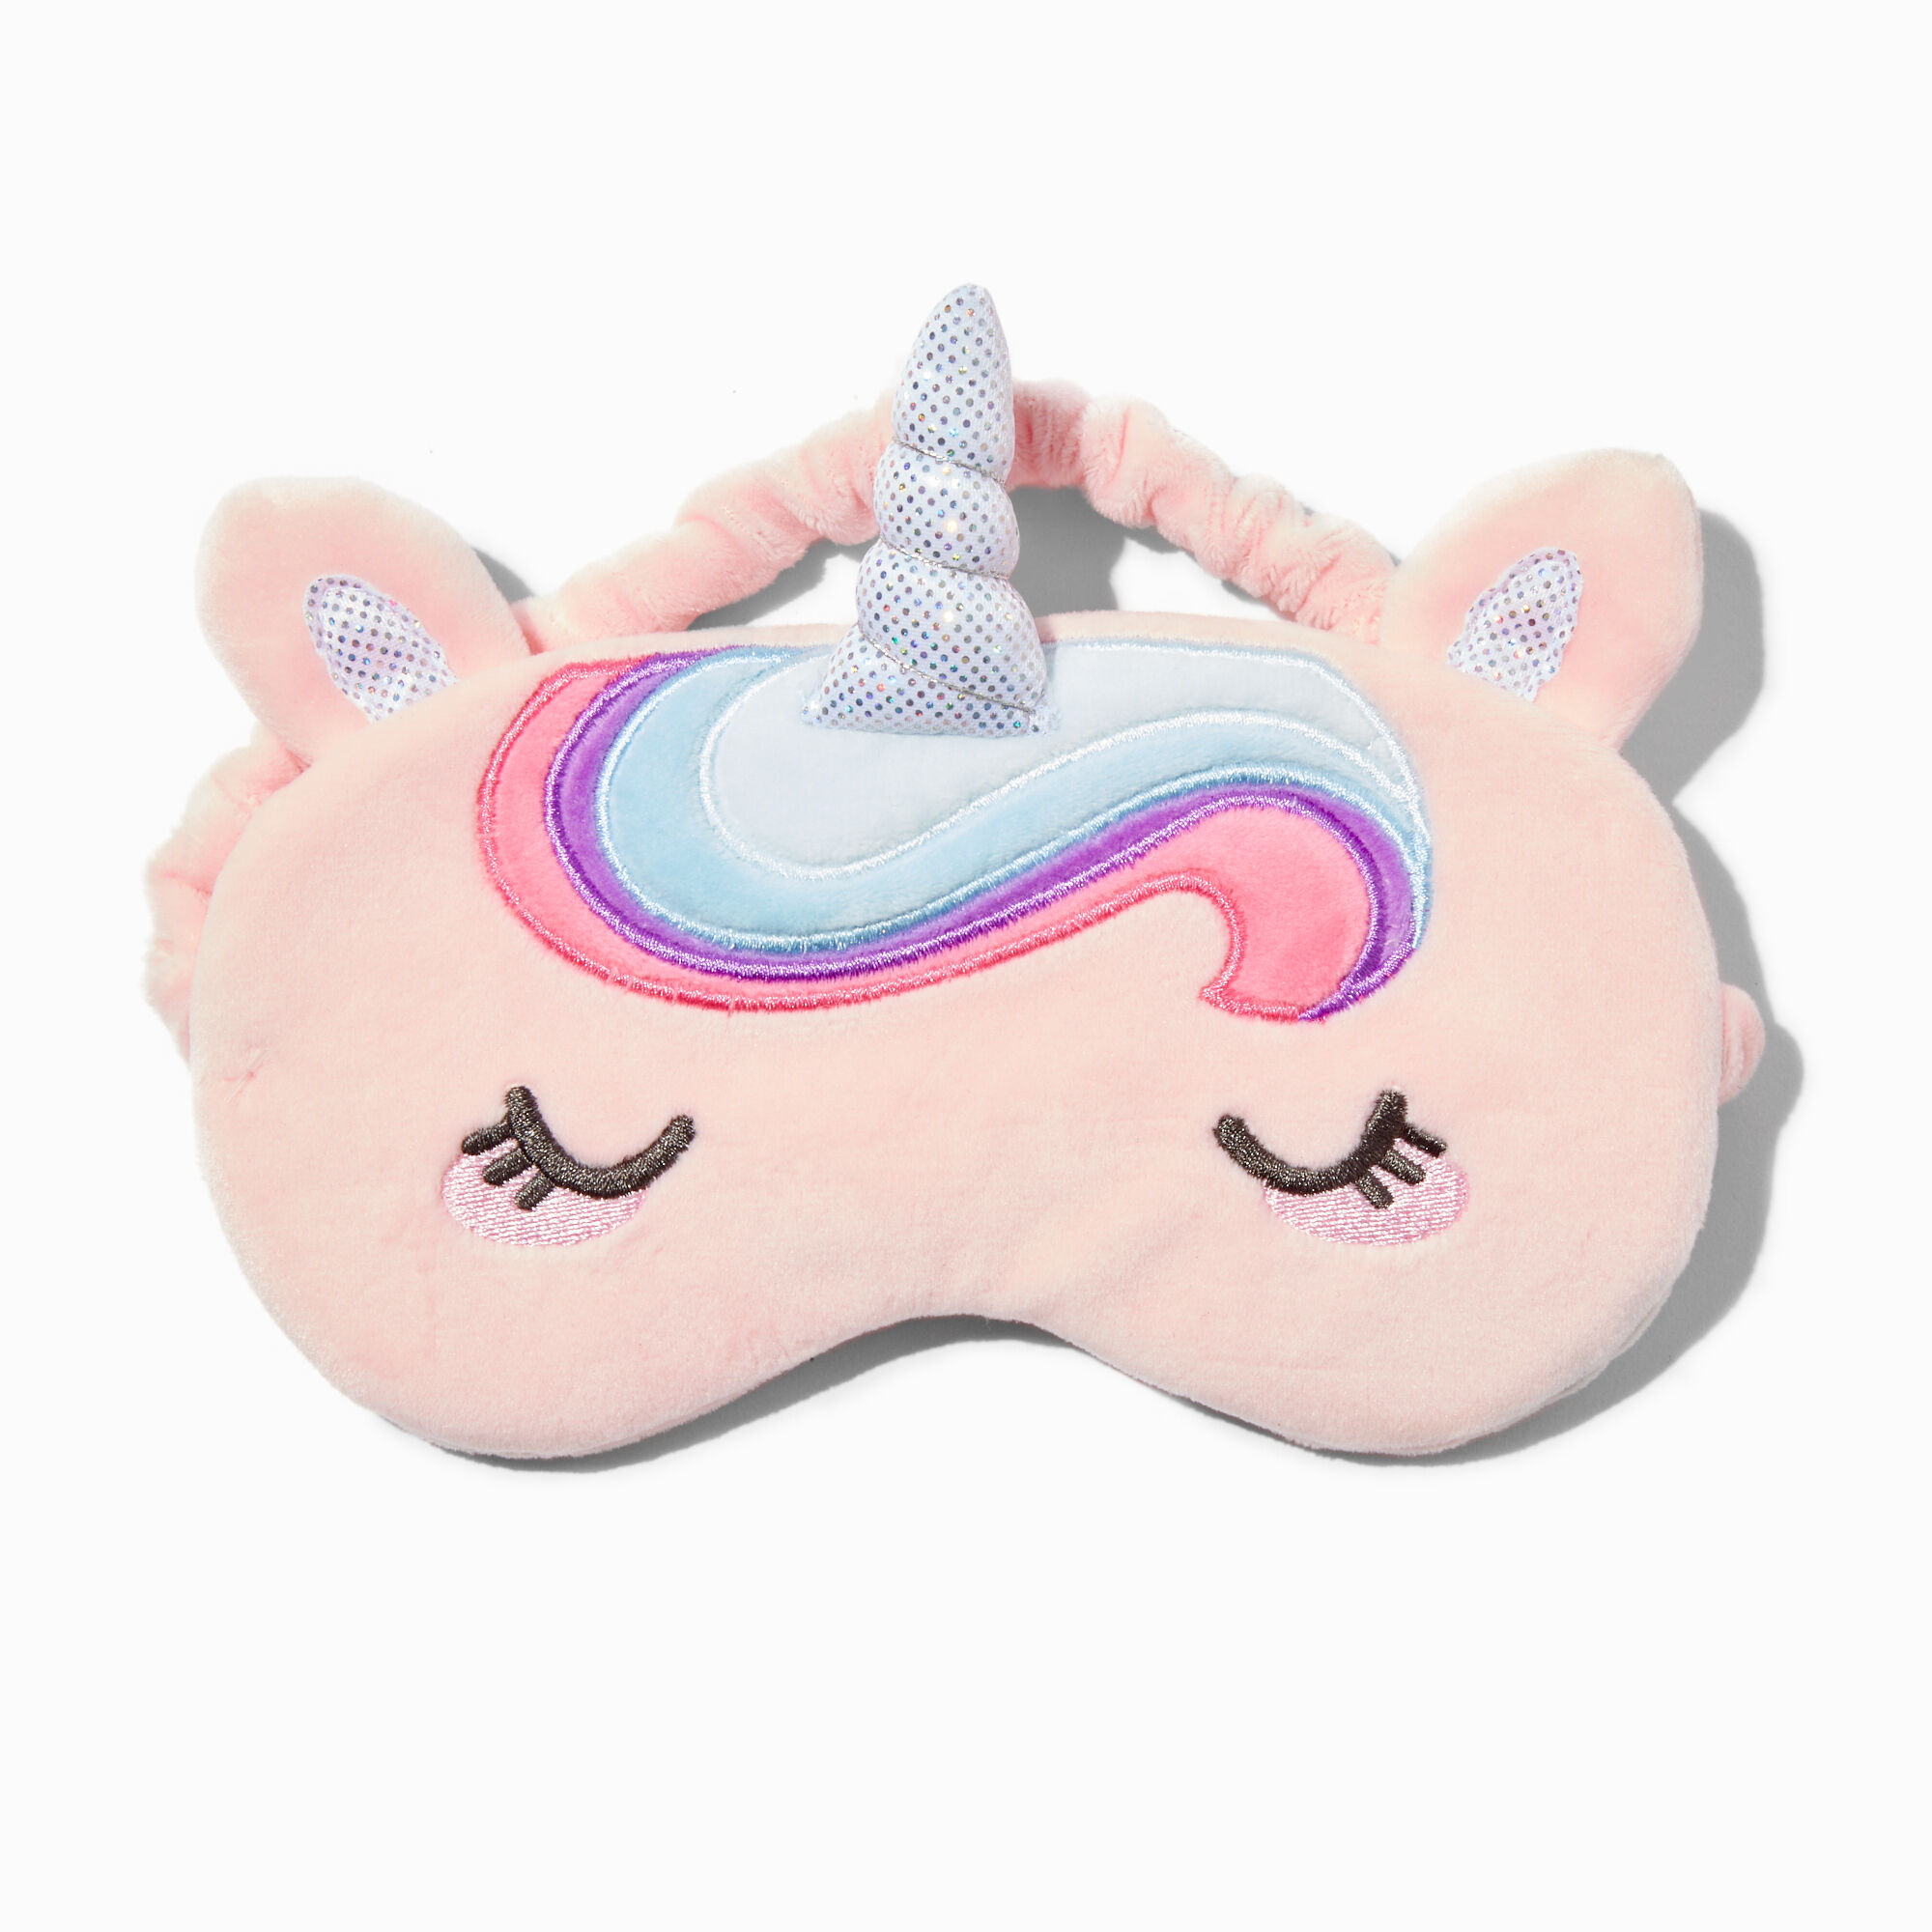 View Claires Chubby Unicorn Plush Sleeping Mask information